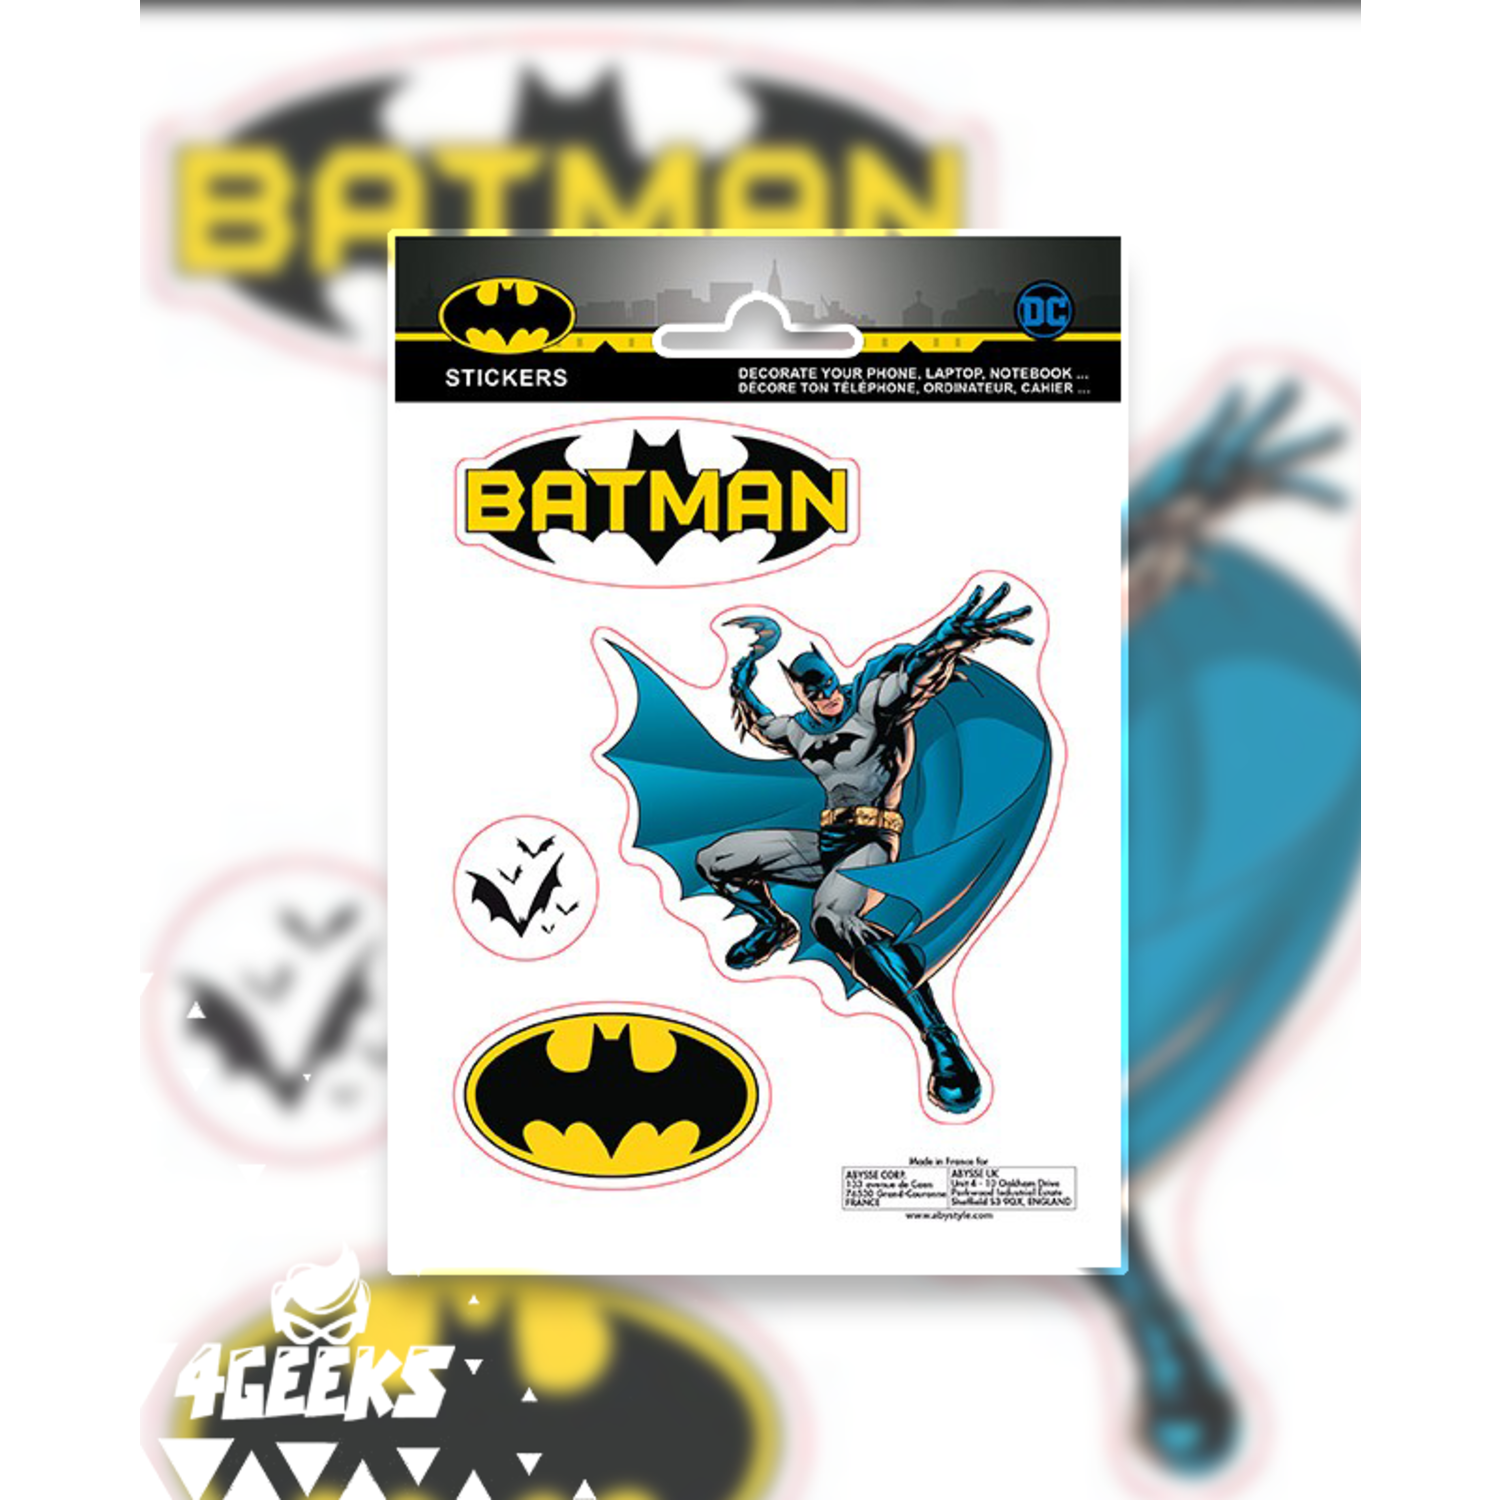 ABYstyle DC Comics: Batman - Stickers - 4GEEKS